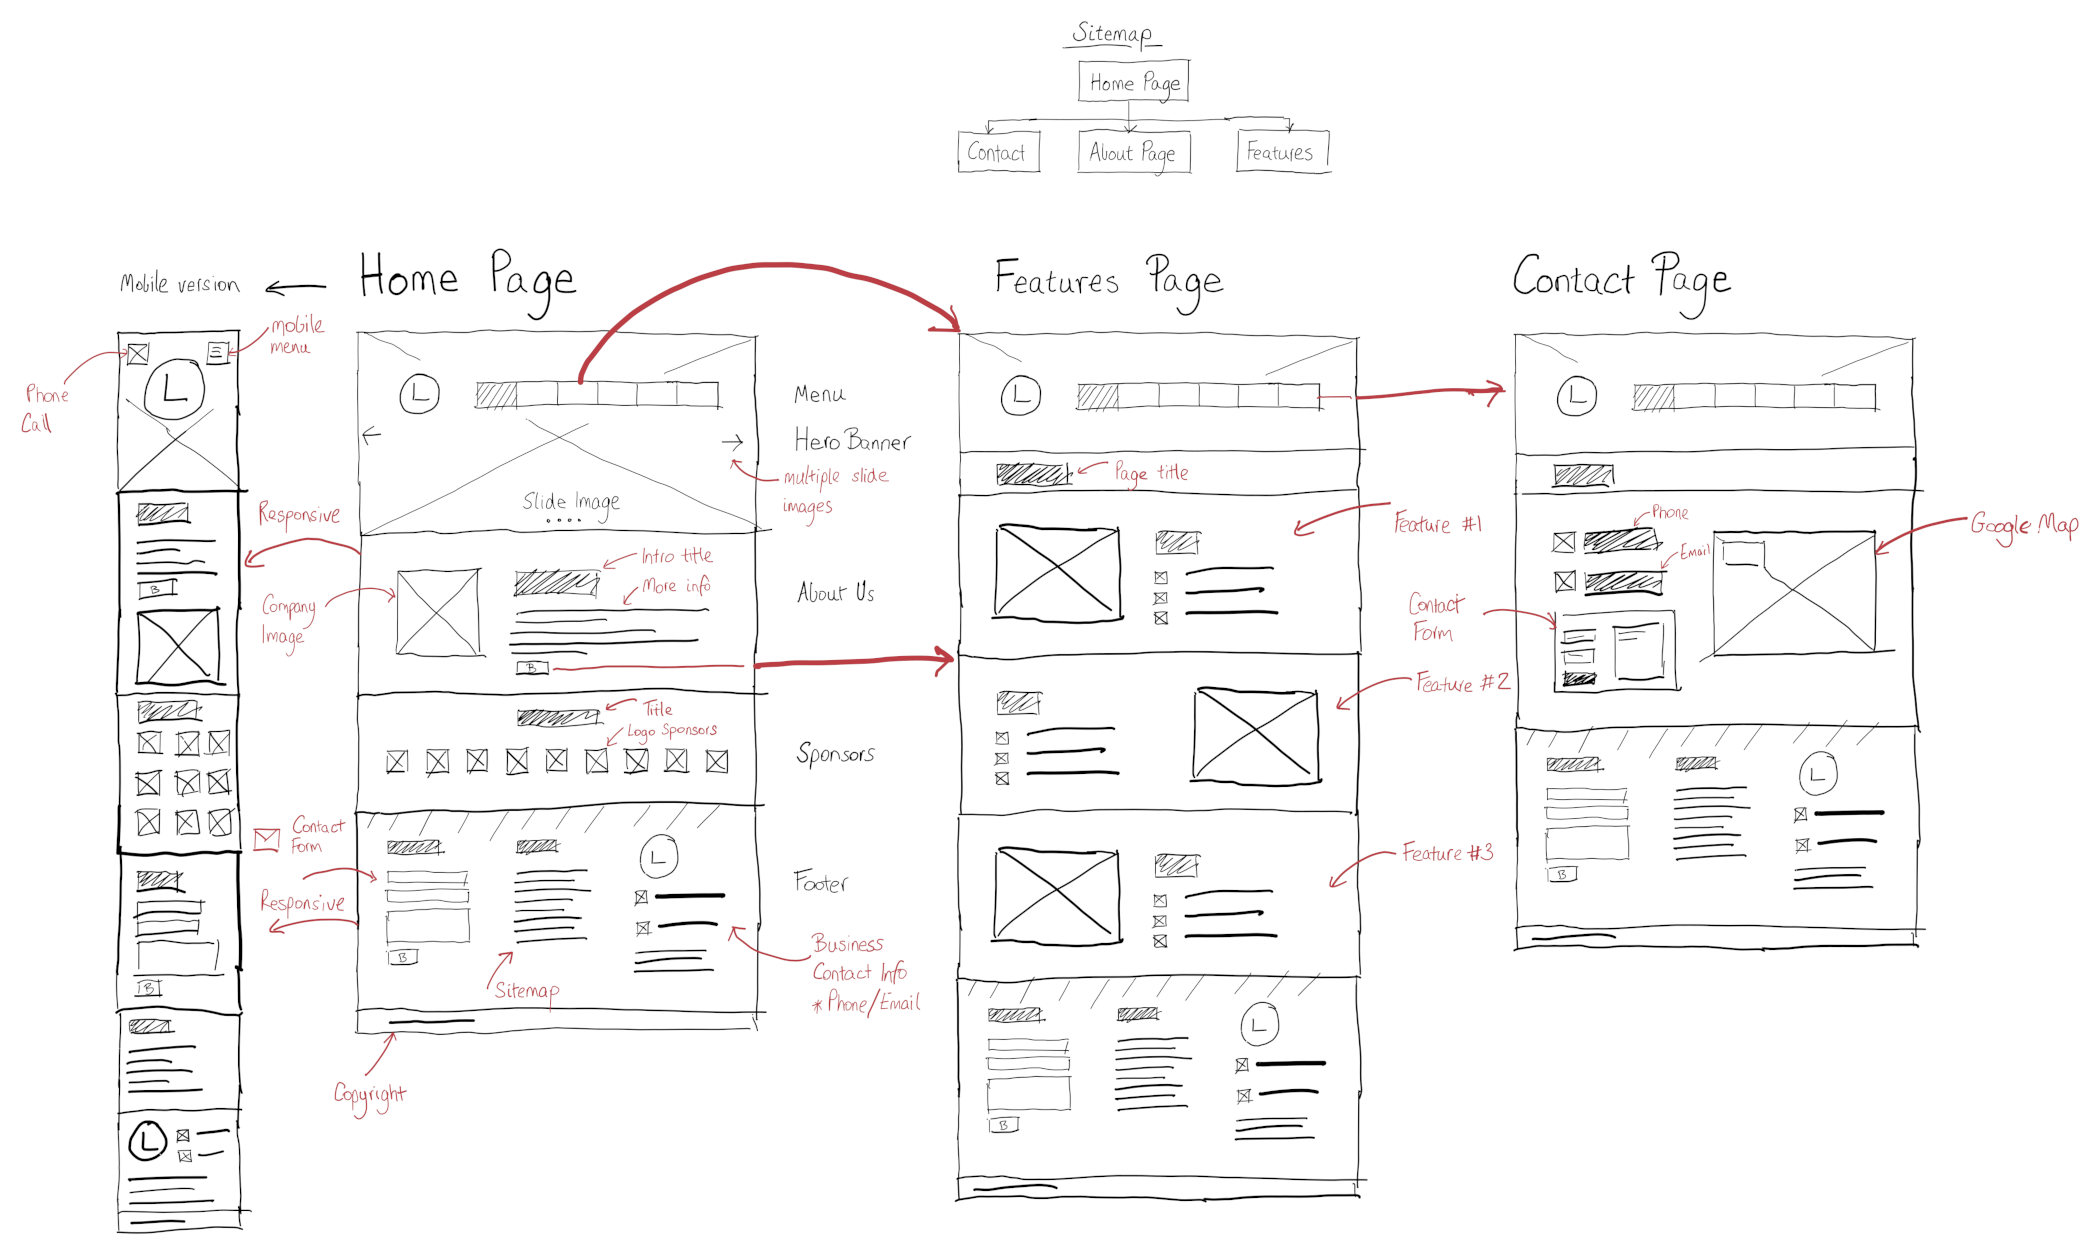 Planning: Sitemap and Wireframe